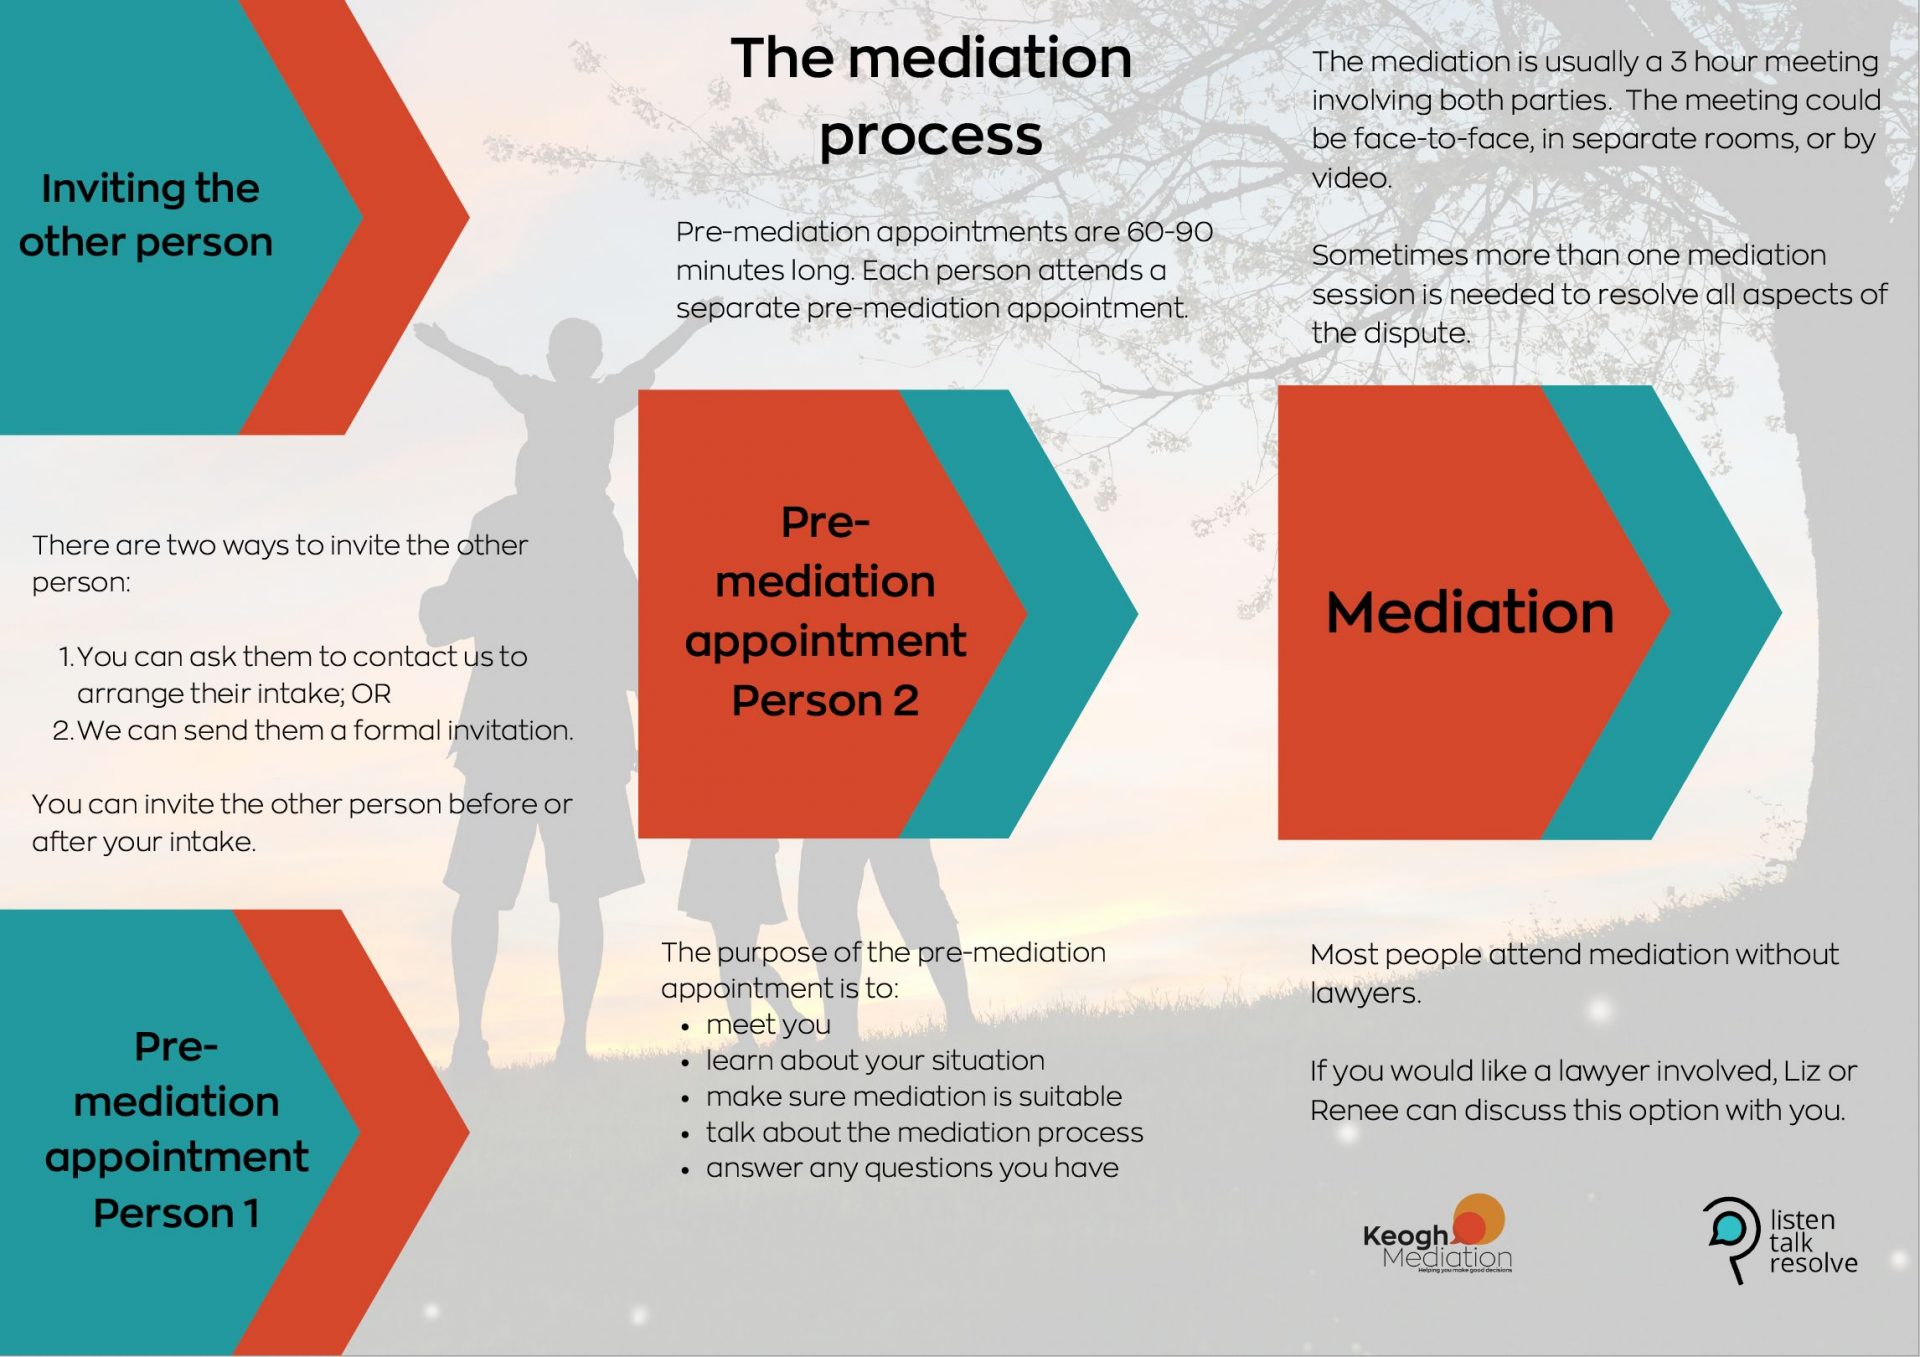 The mediation process for both people including invitations, pre-mediation appointments and mediation.